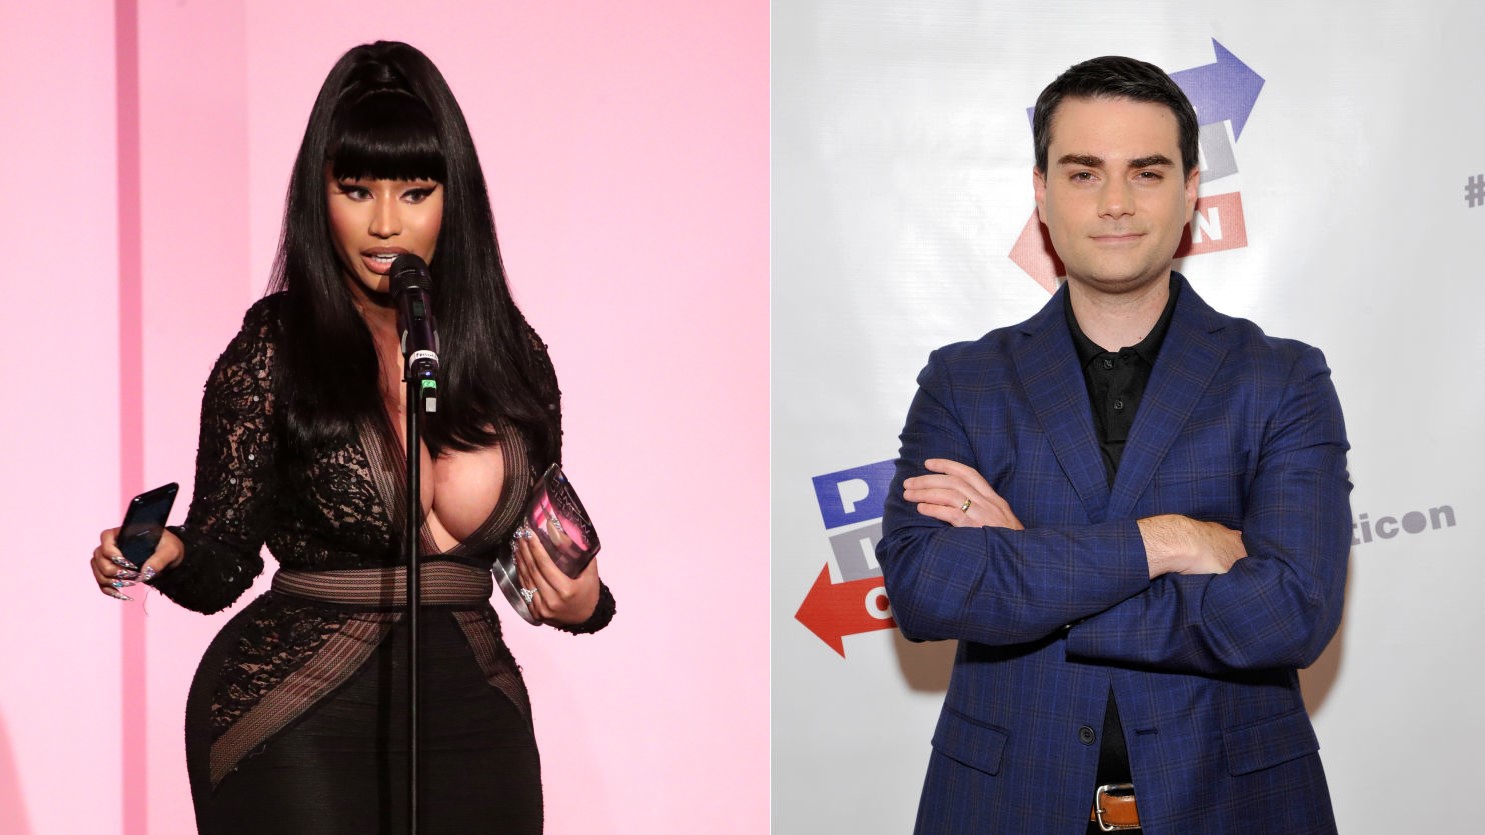 Why Conservatives Like Ben Shapiro Are Triggered by Cardi B and